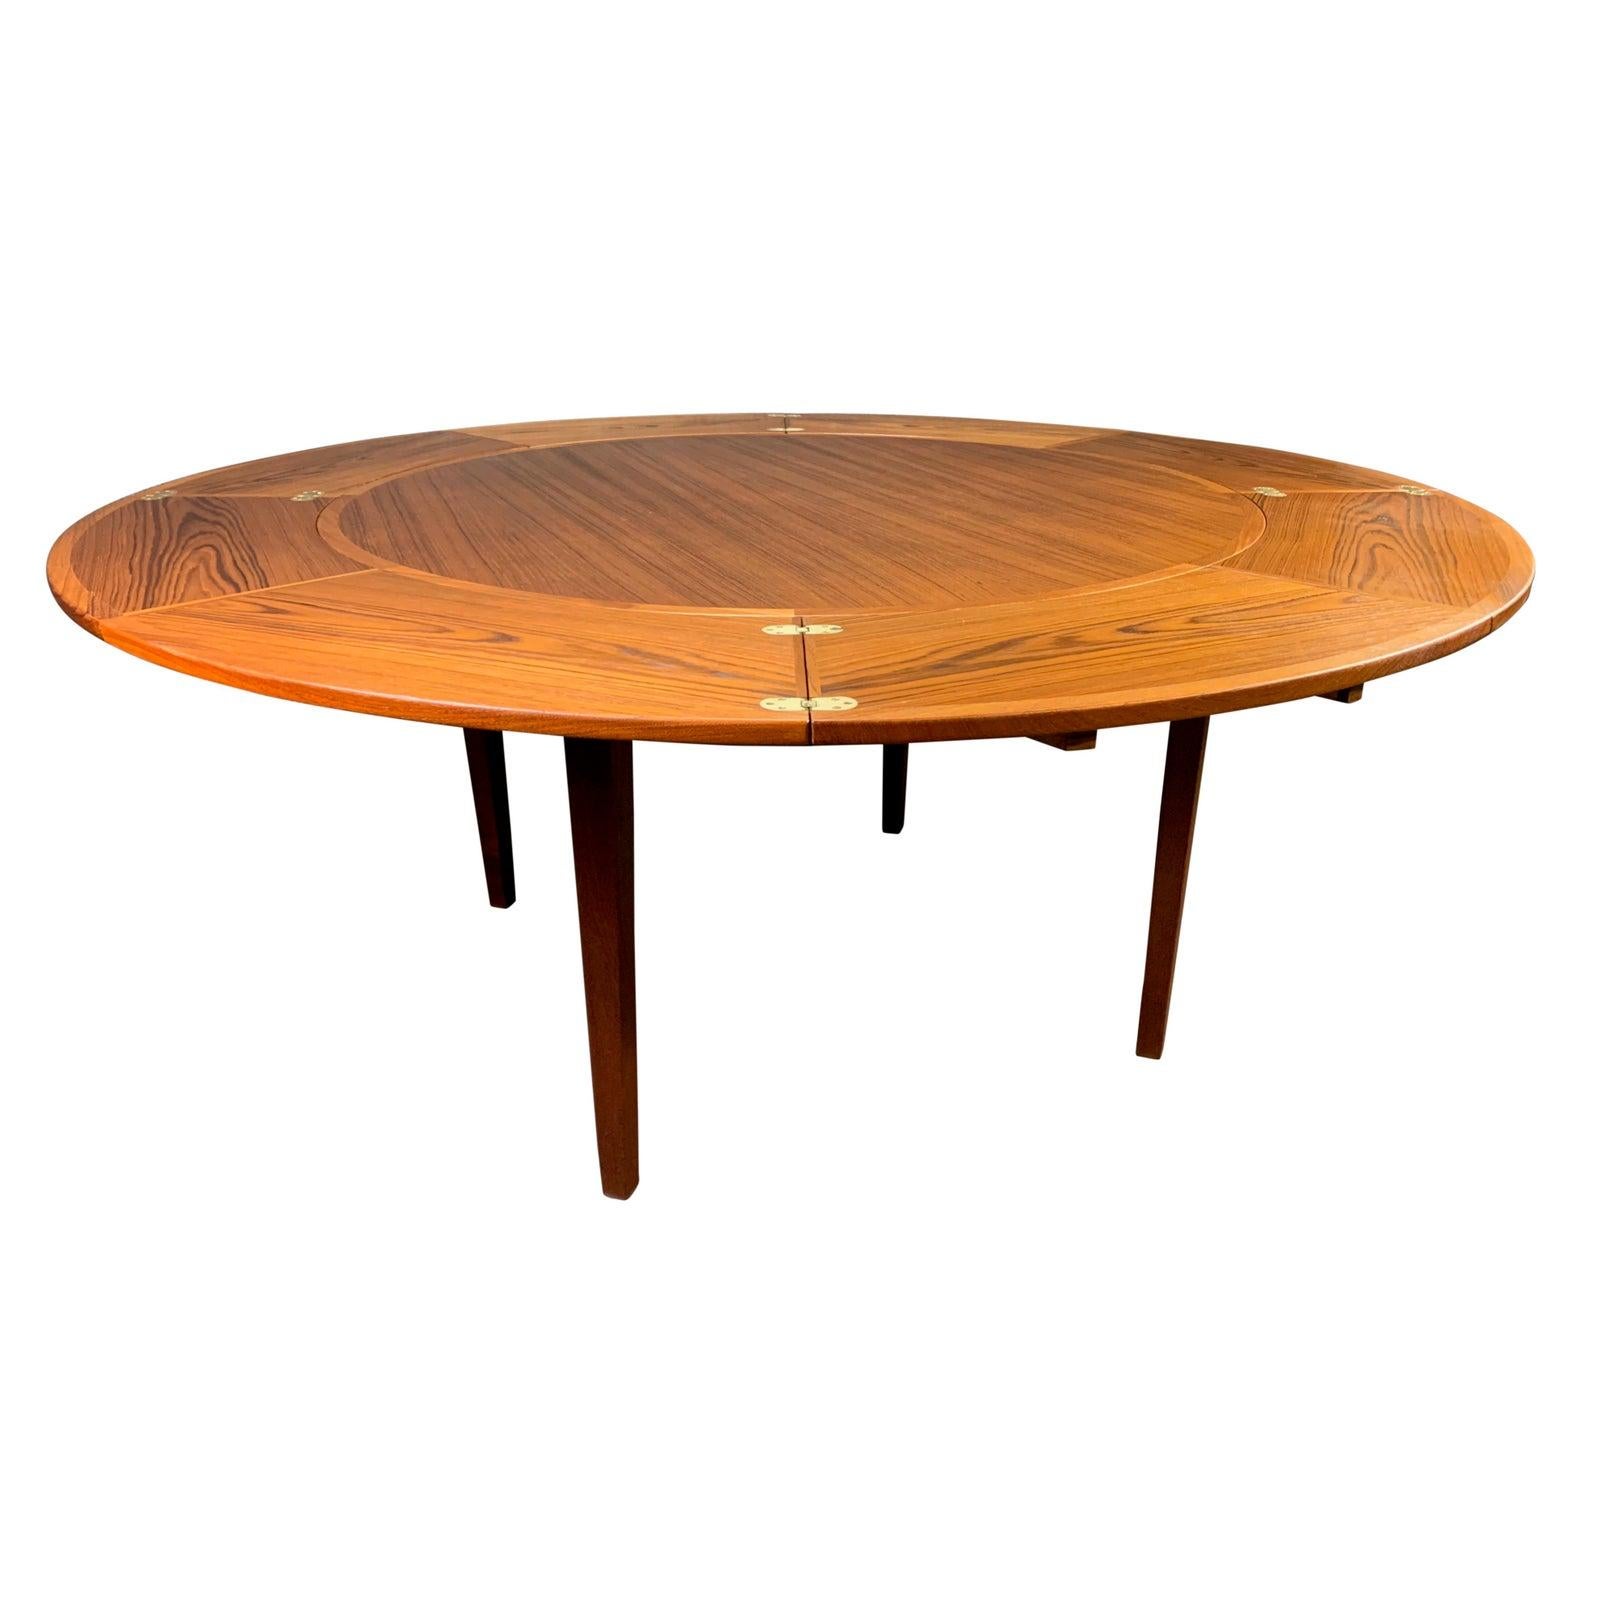 Here is an exclusive and sought after dining table, referred as the 